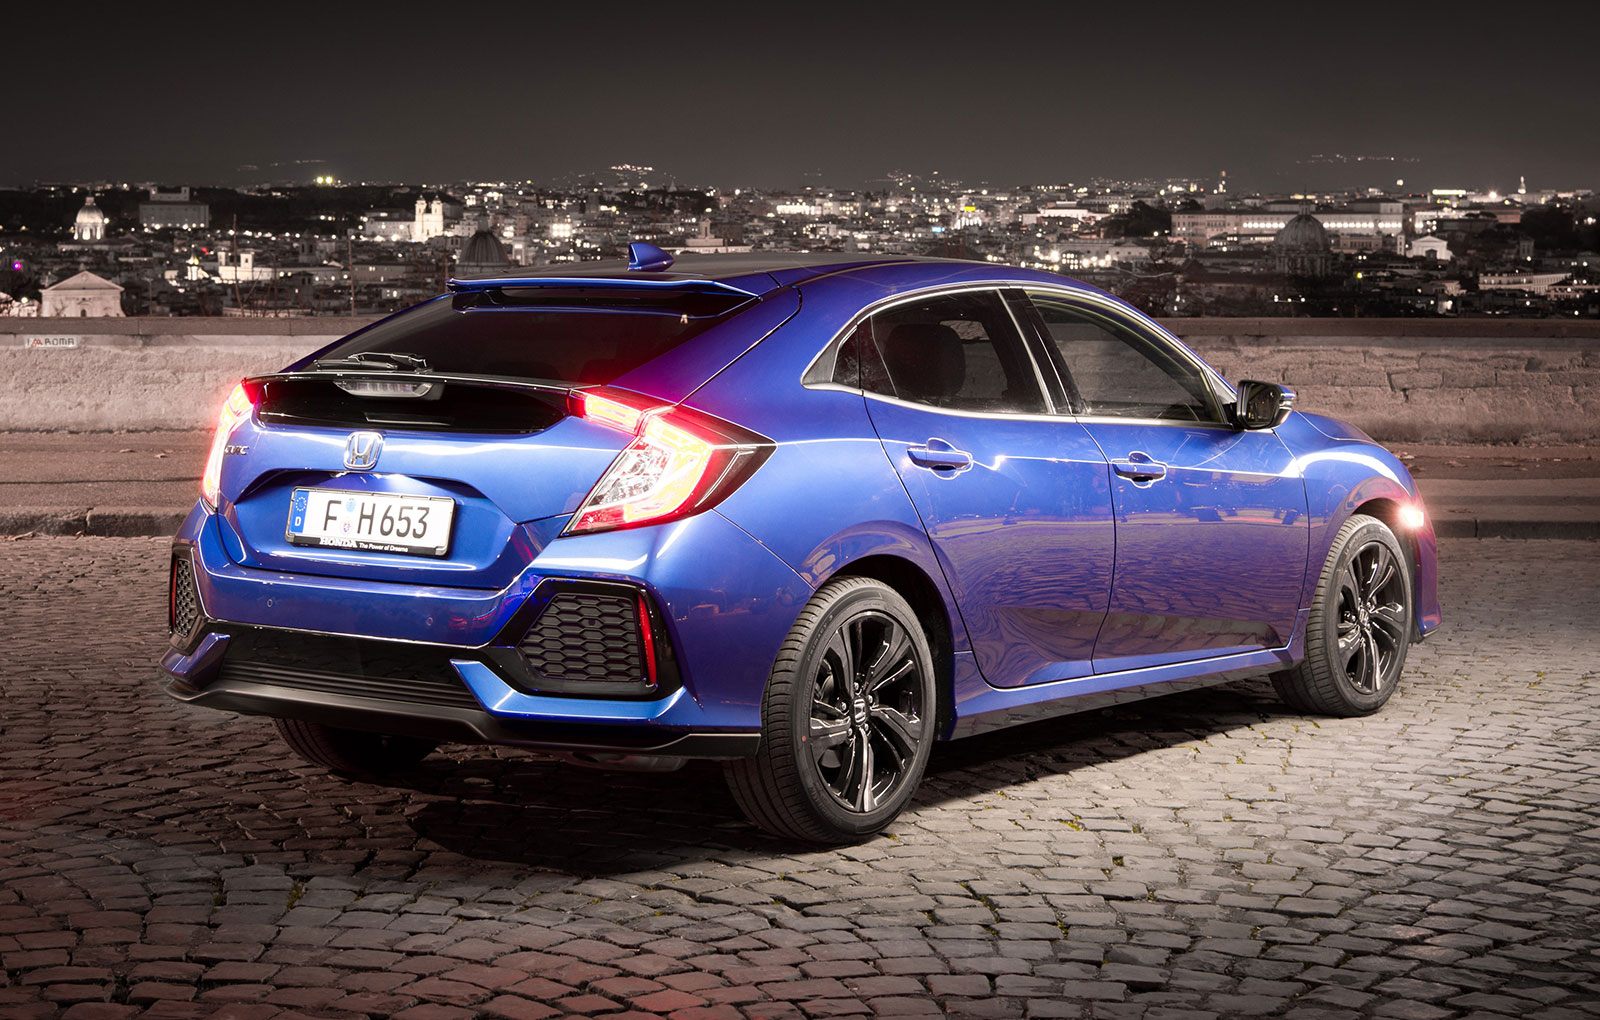 2019 Honda Civic Gets 1.6 Diesel With 9-Speed Automatic - autoevolution